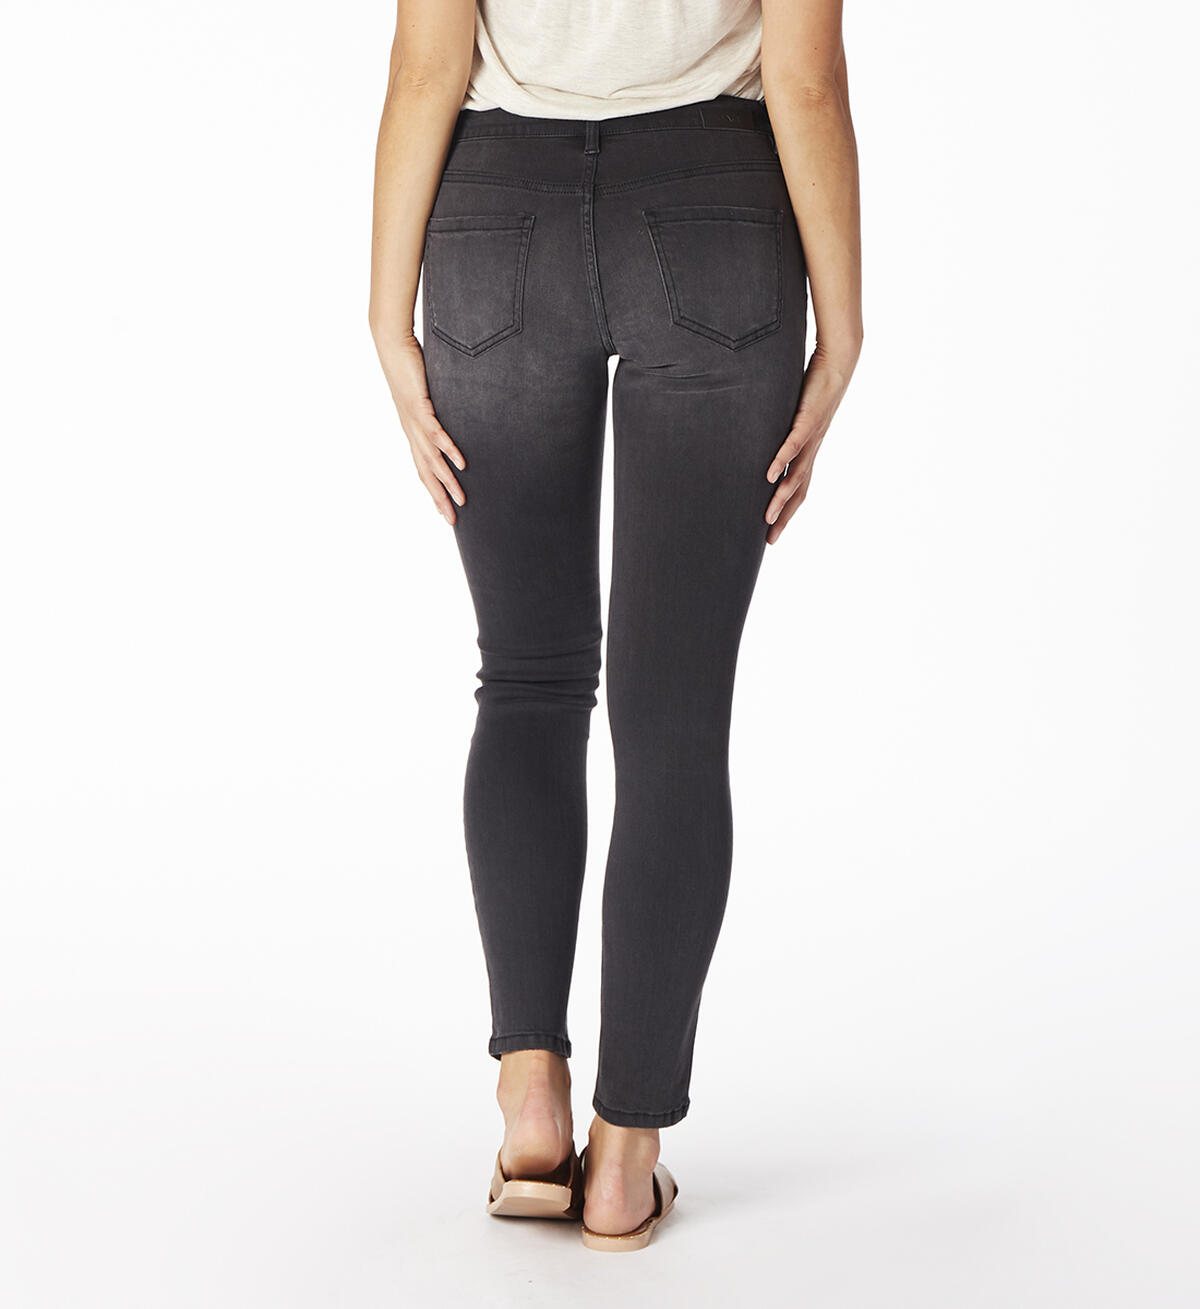 Sheridan Skinny With Embroidery, , hi-res image number 1